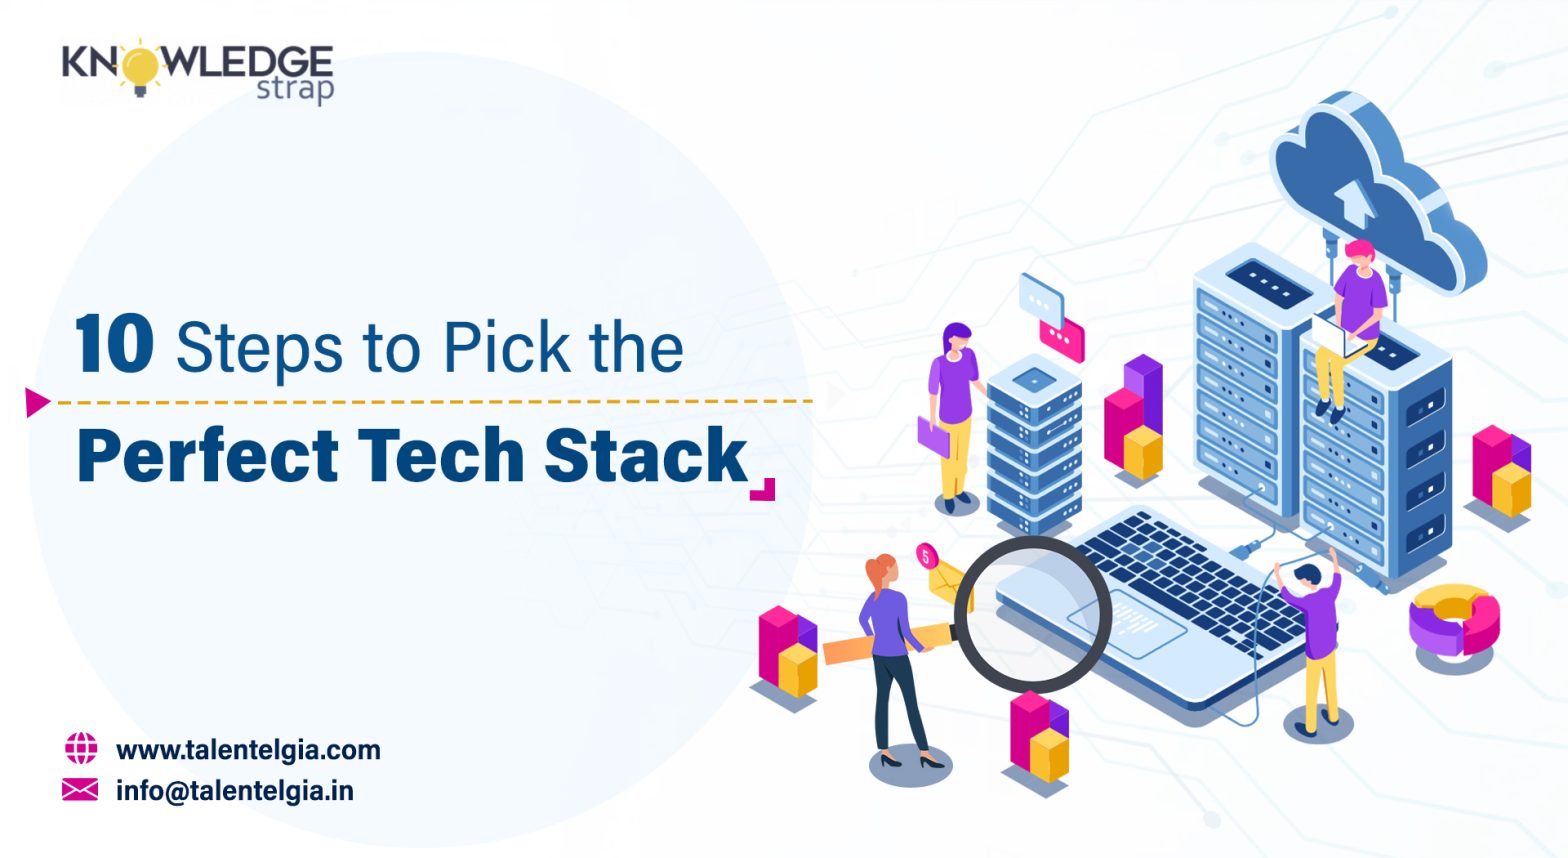 10 Steps to Pick the Perfect Tech Stack